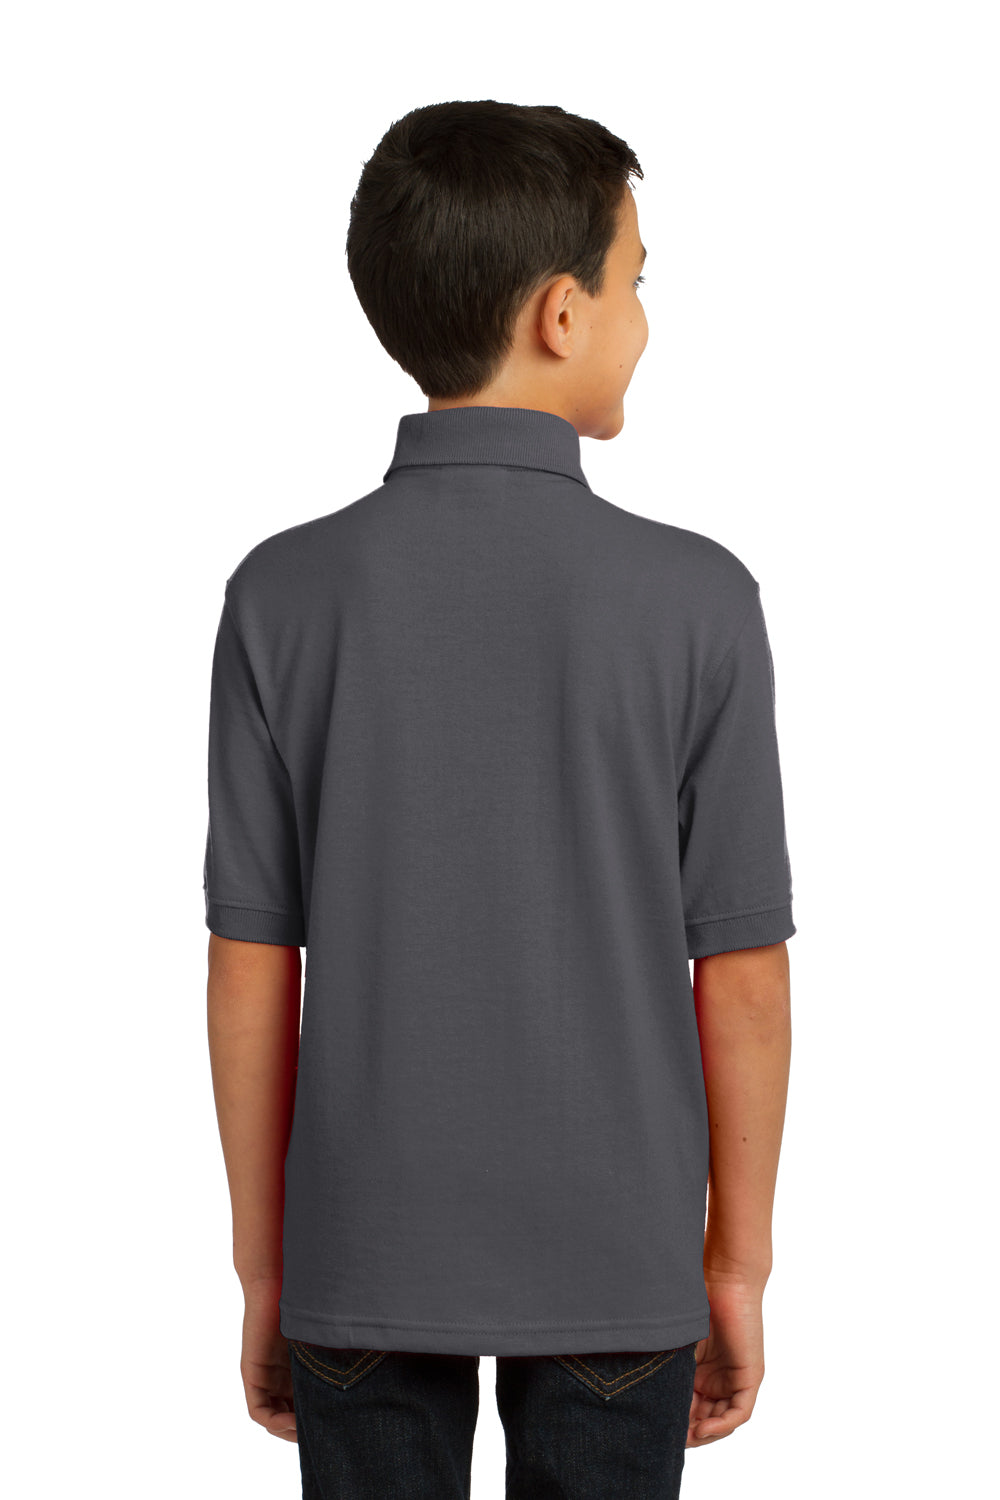 Port & Company KP55Y Youth Core Stain Resistant Short Sleeve Polo Shirt Charcoal Grey Back